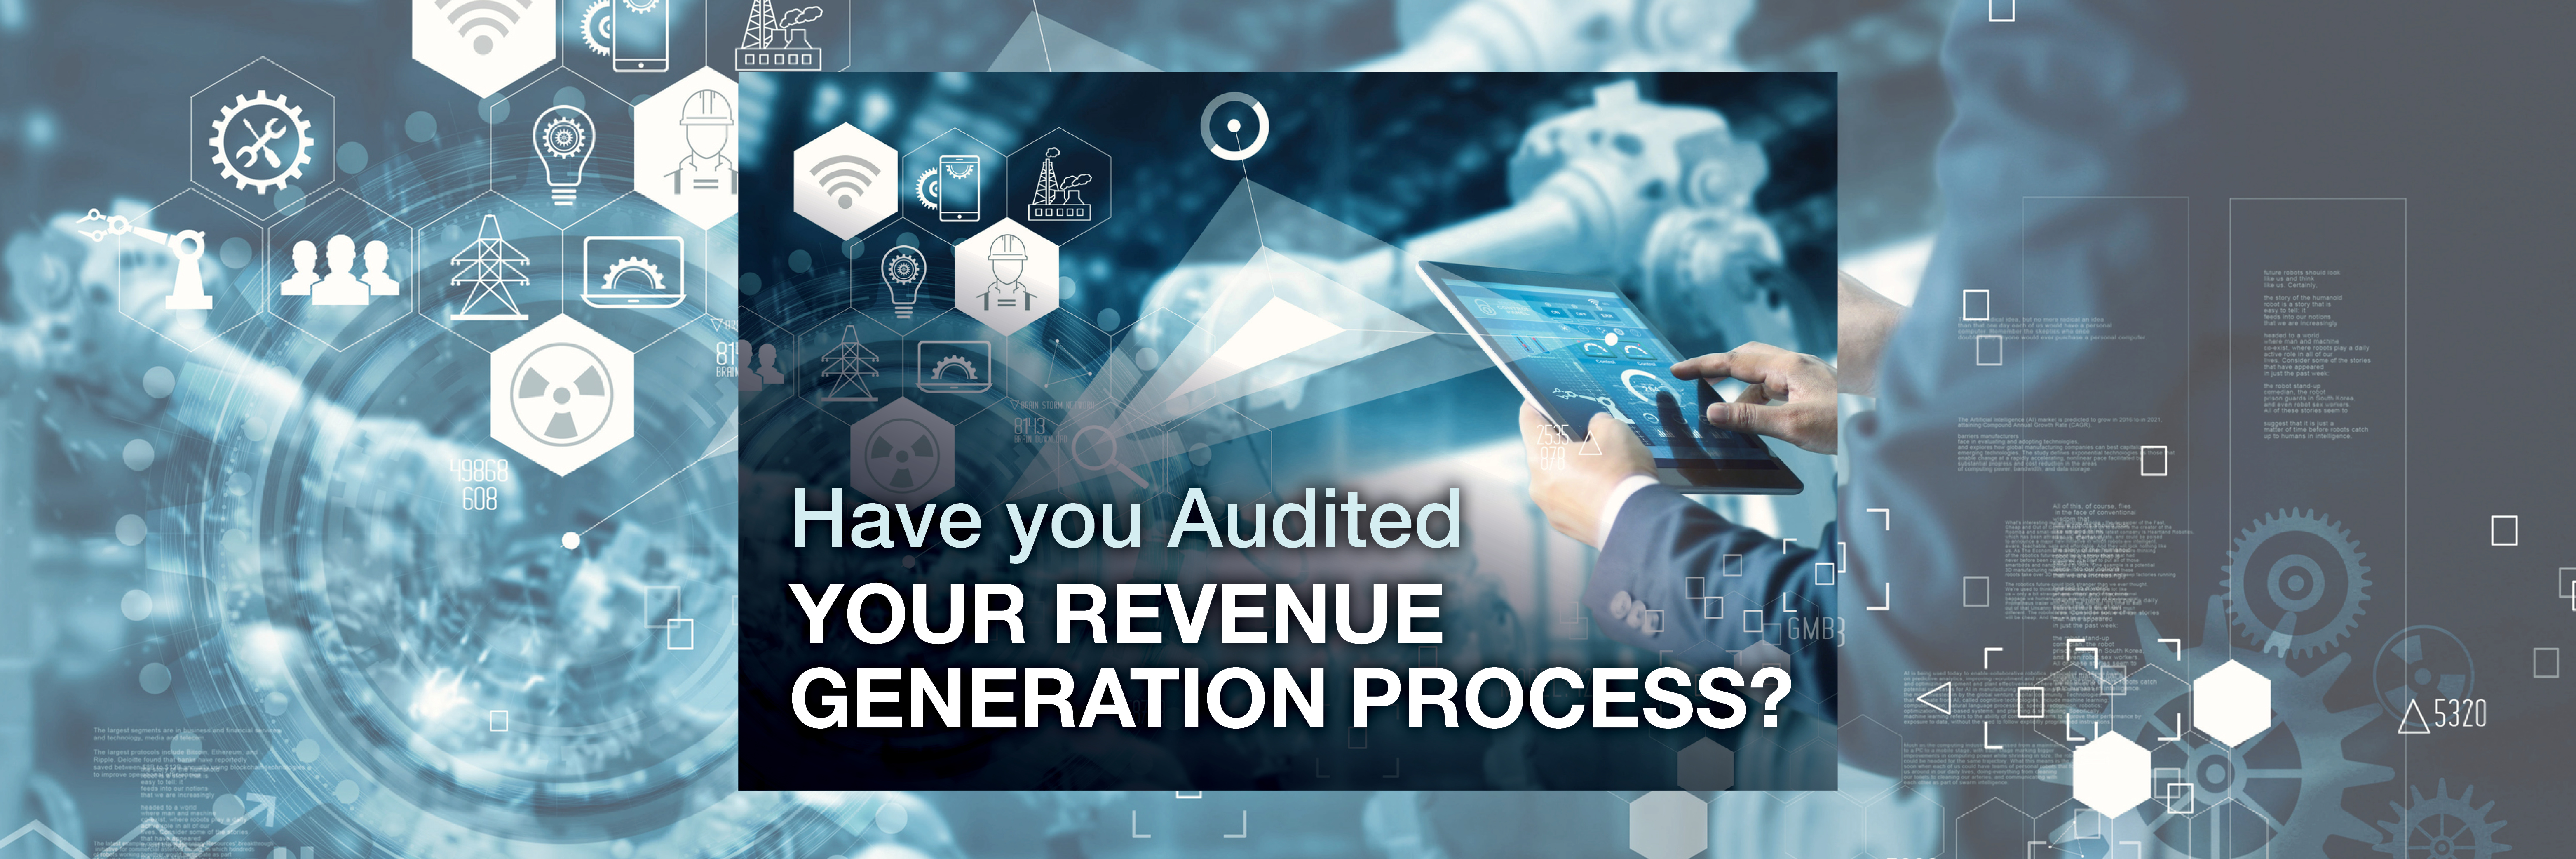 Have you Audited Your Revenue Generation Process?